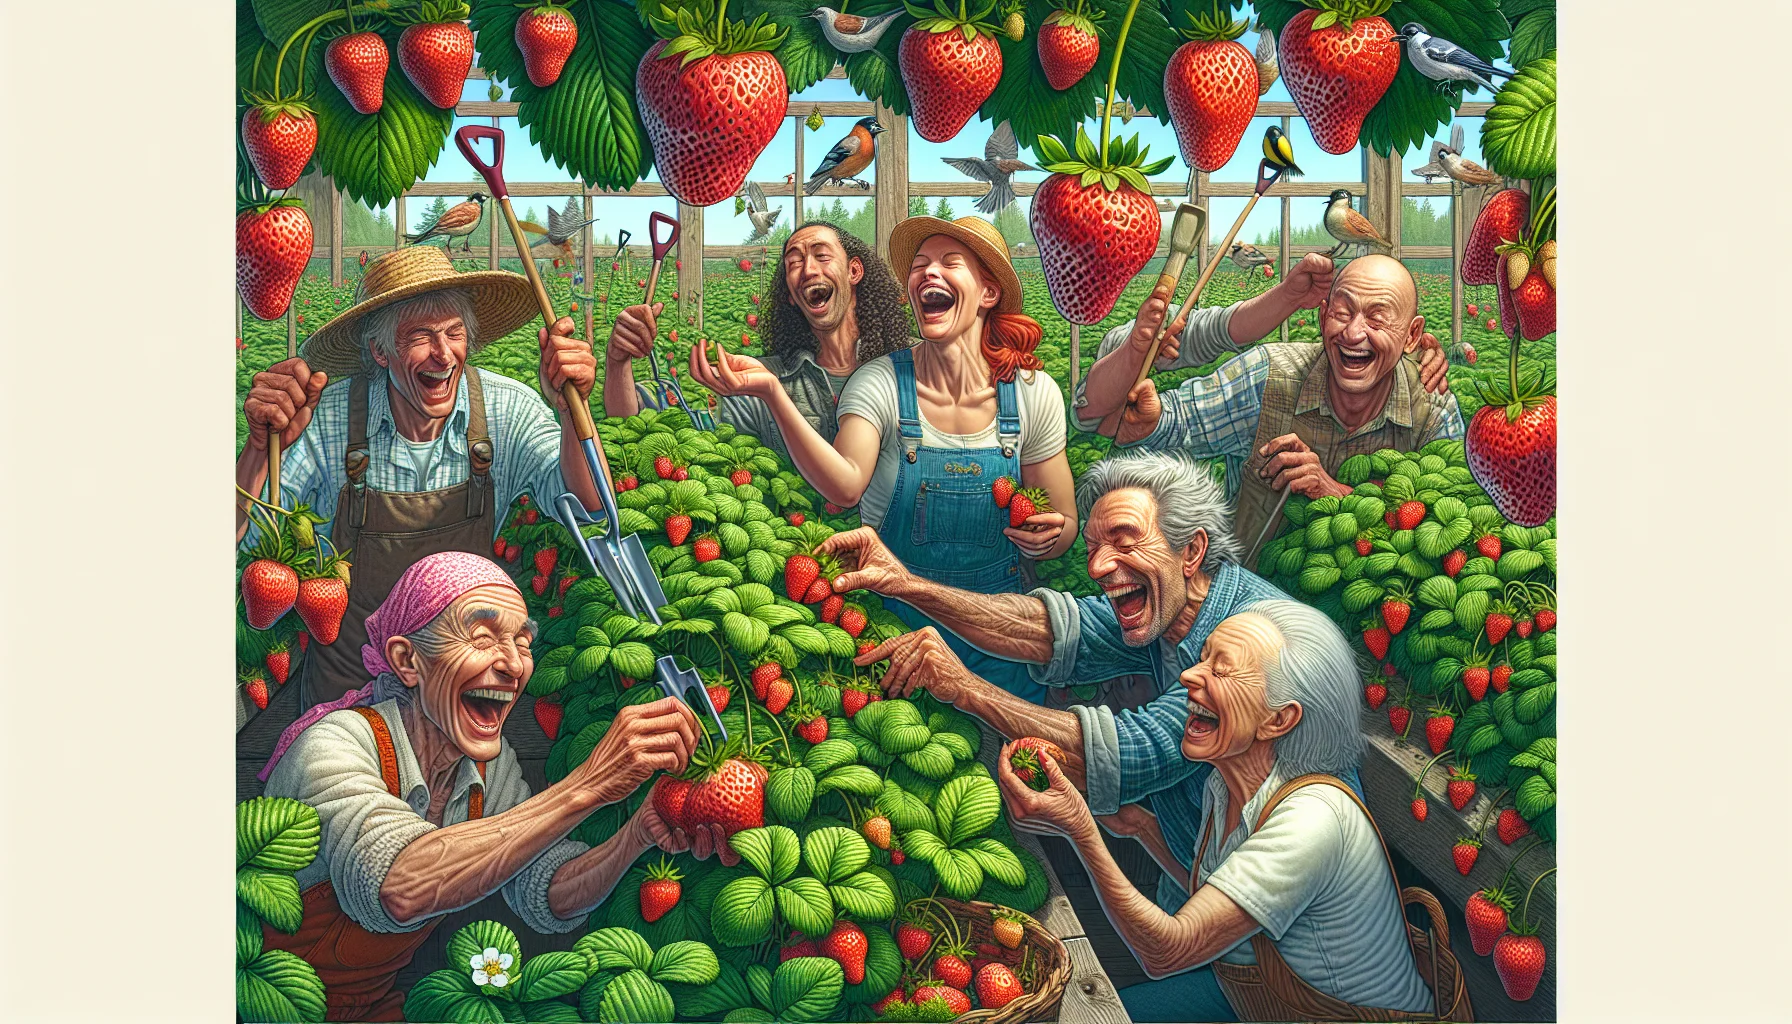 Create a detailed and realistic image that tells a comical story of gardening. Mirror the aspect of strawberries being perennials, indicating that they return year after year. This gardening scene showcases a lush strawberry plant laden with ripe, juicy strawberries. A variety of humans of different genders and descents, in their gardening attire are laughing as they try to reach for the juicy strawberries. They exude enthusiasm and joy, seemingly enchanted by the simple pleasure of gardening. Birds and insects surround them, adding to the humor and lively atmosphere. This engaging scene should evoke a sense of joy and encourage viewers to indulge in gardening activities.